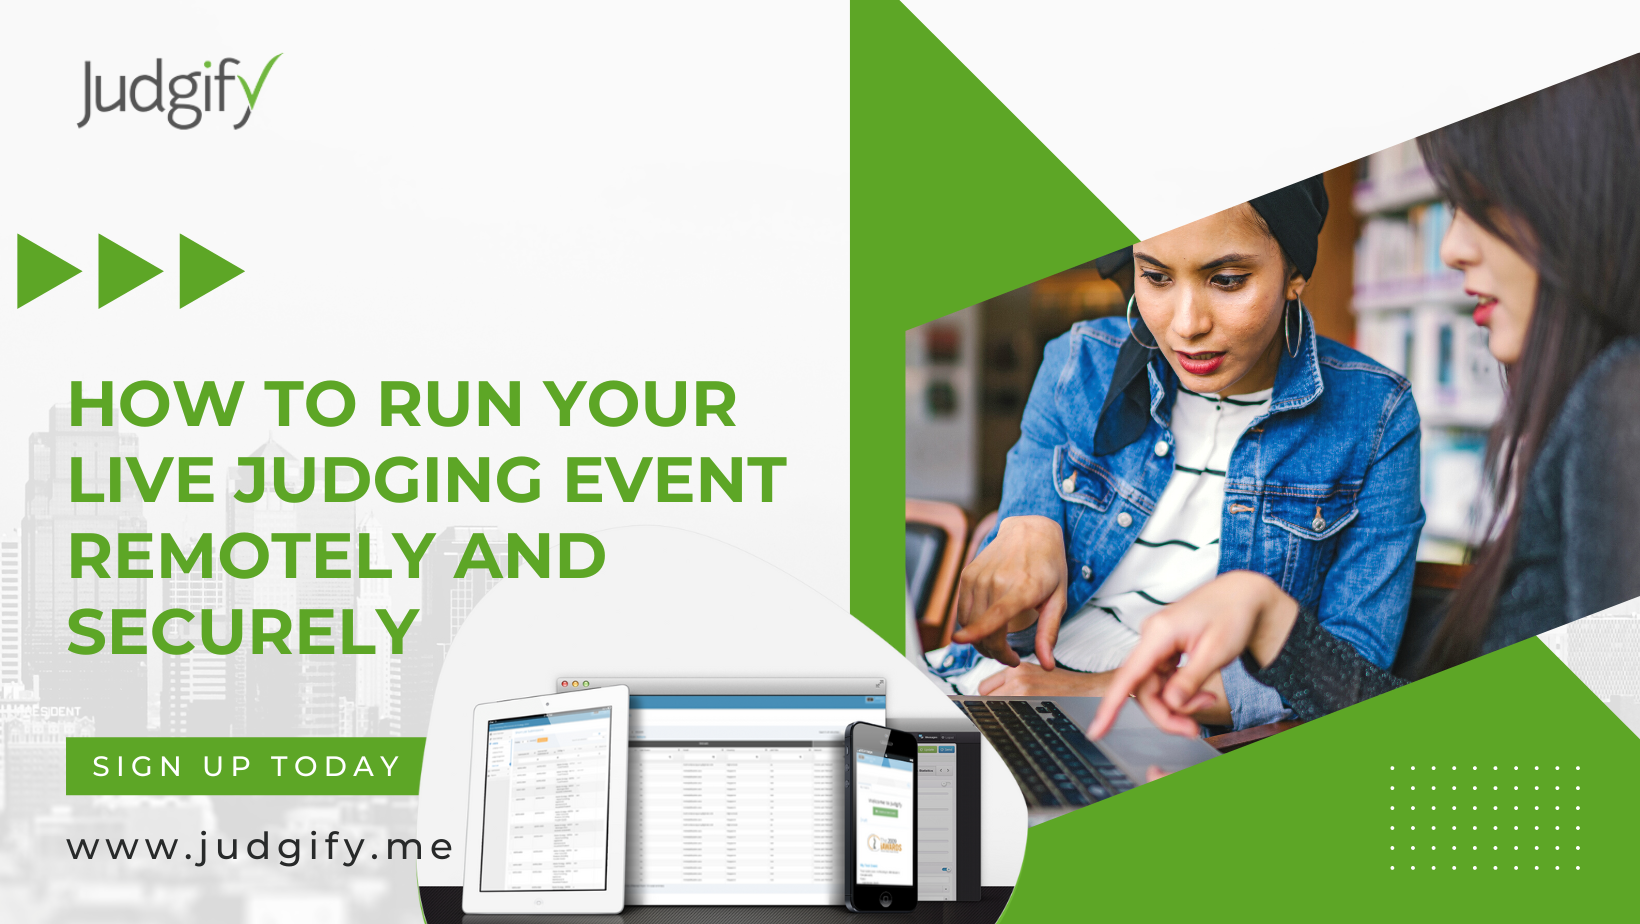 How to run your live judging event remotely and securely